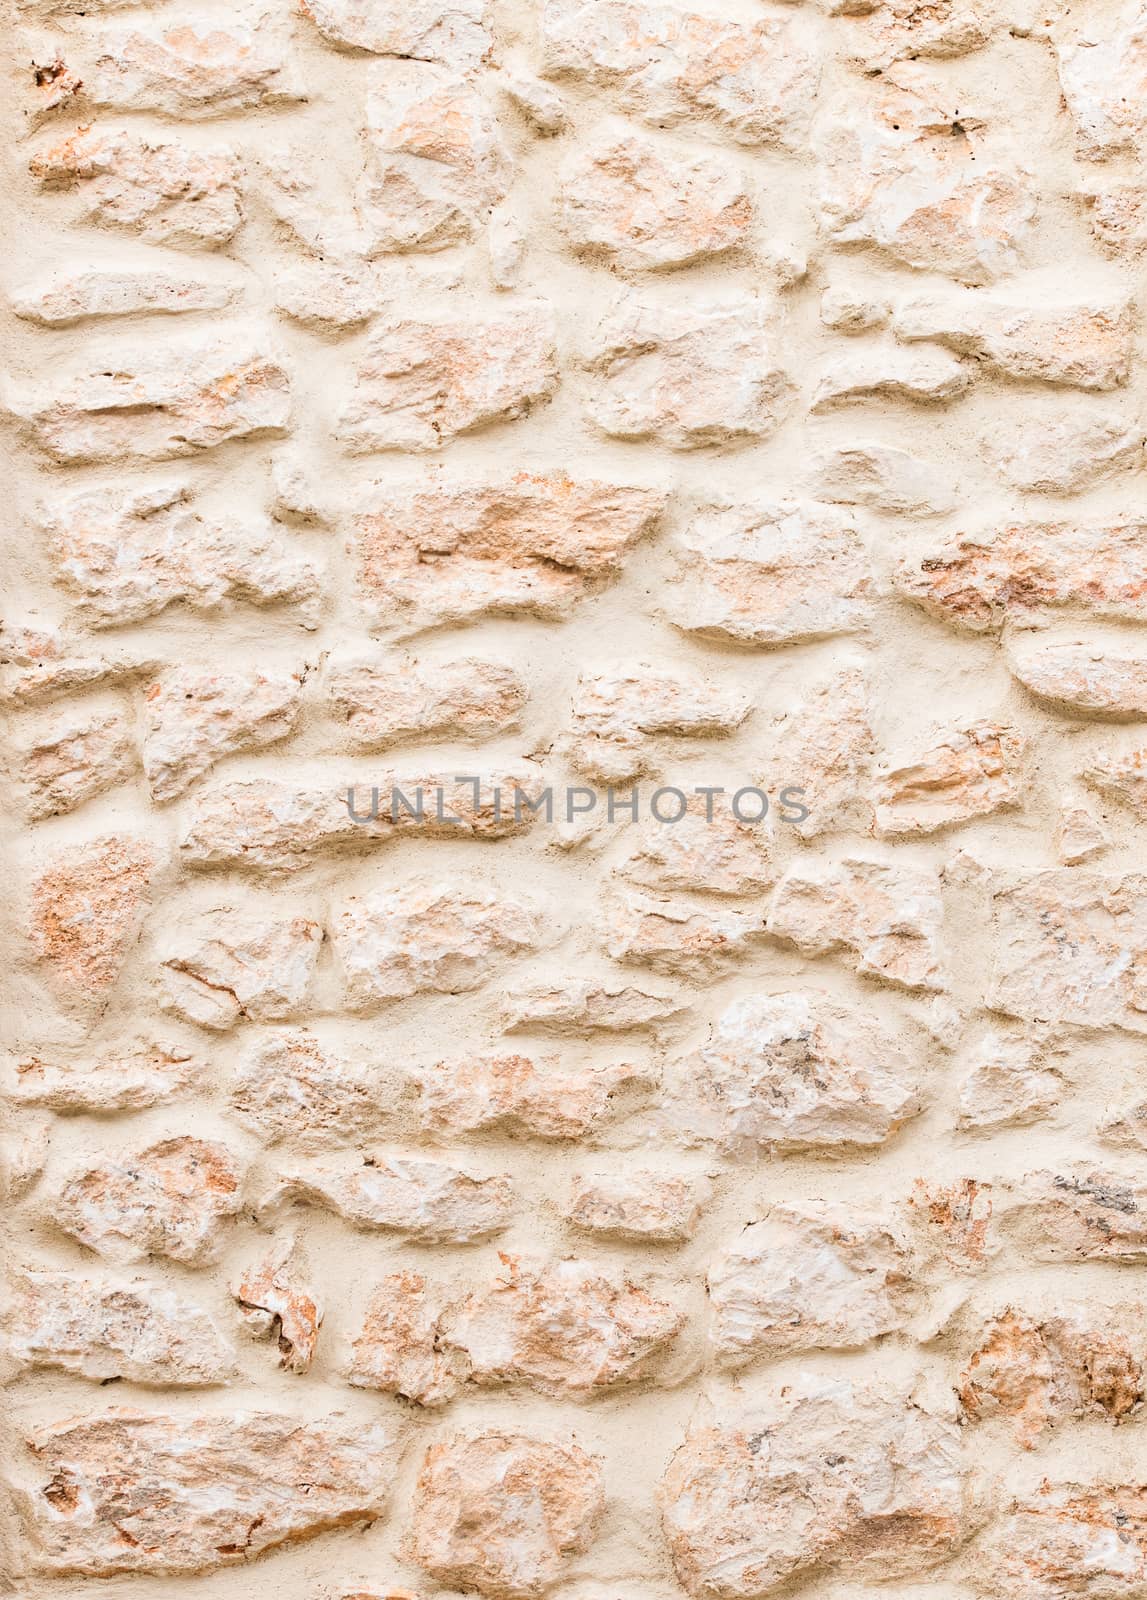 Rustic gray stone wall texture background structure